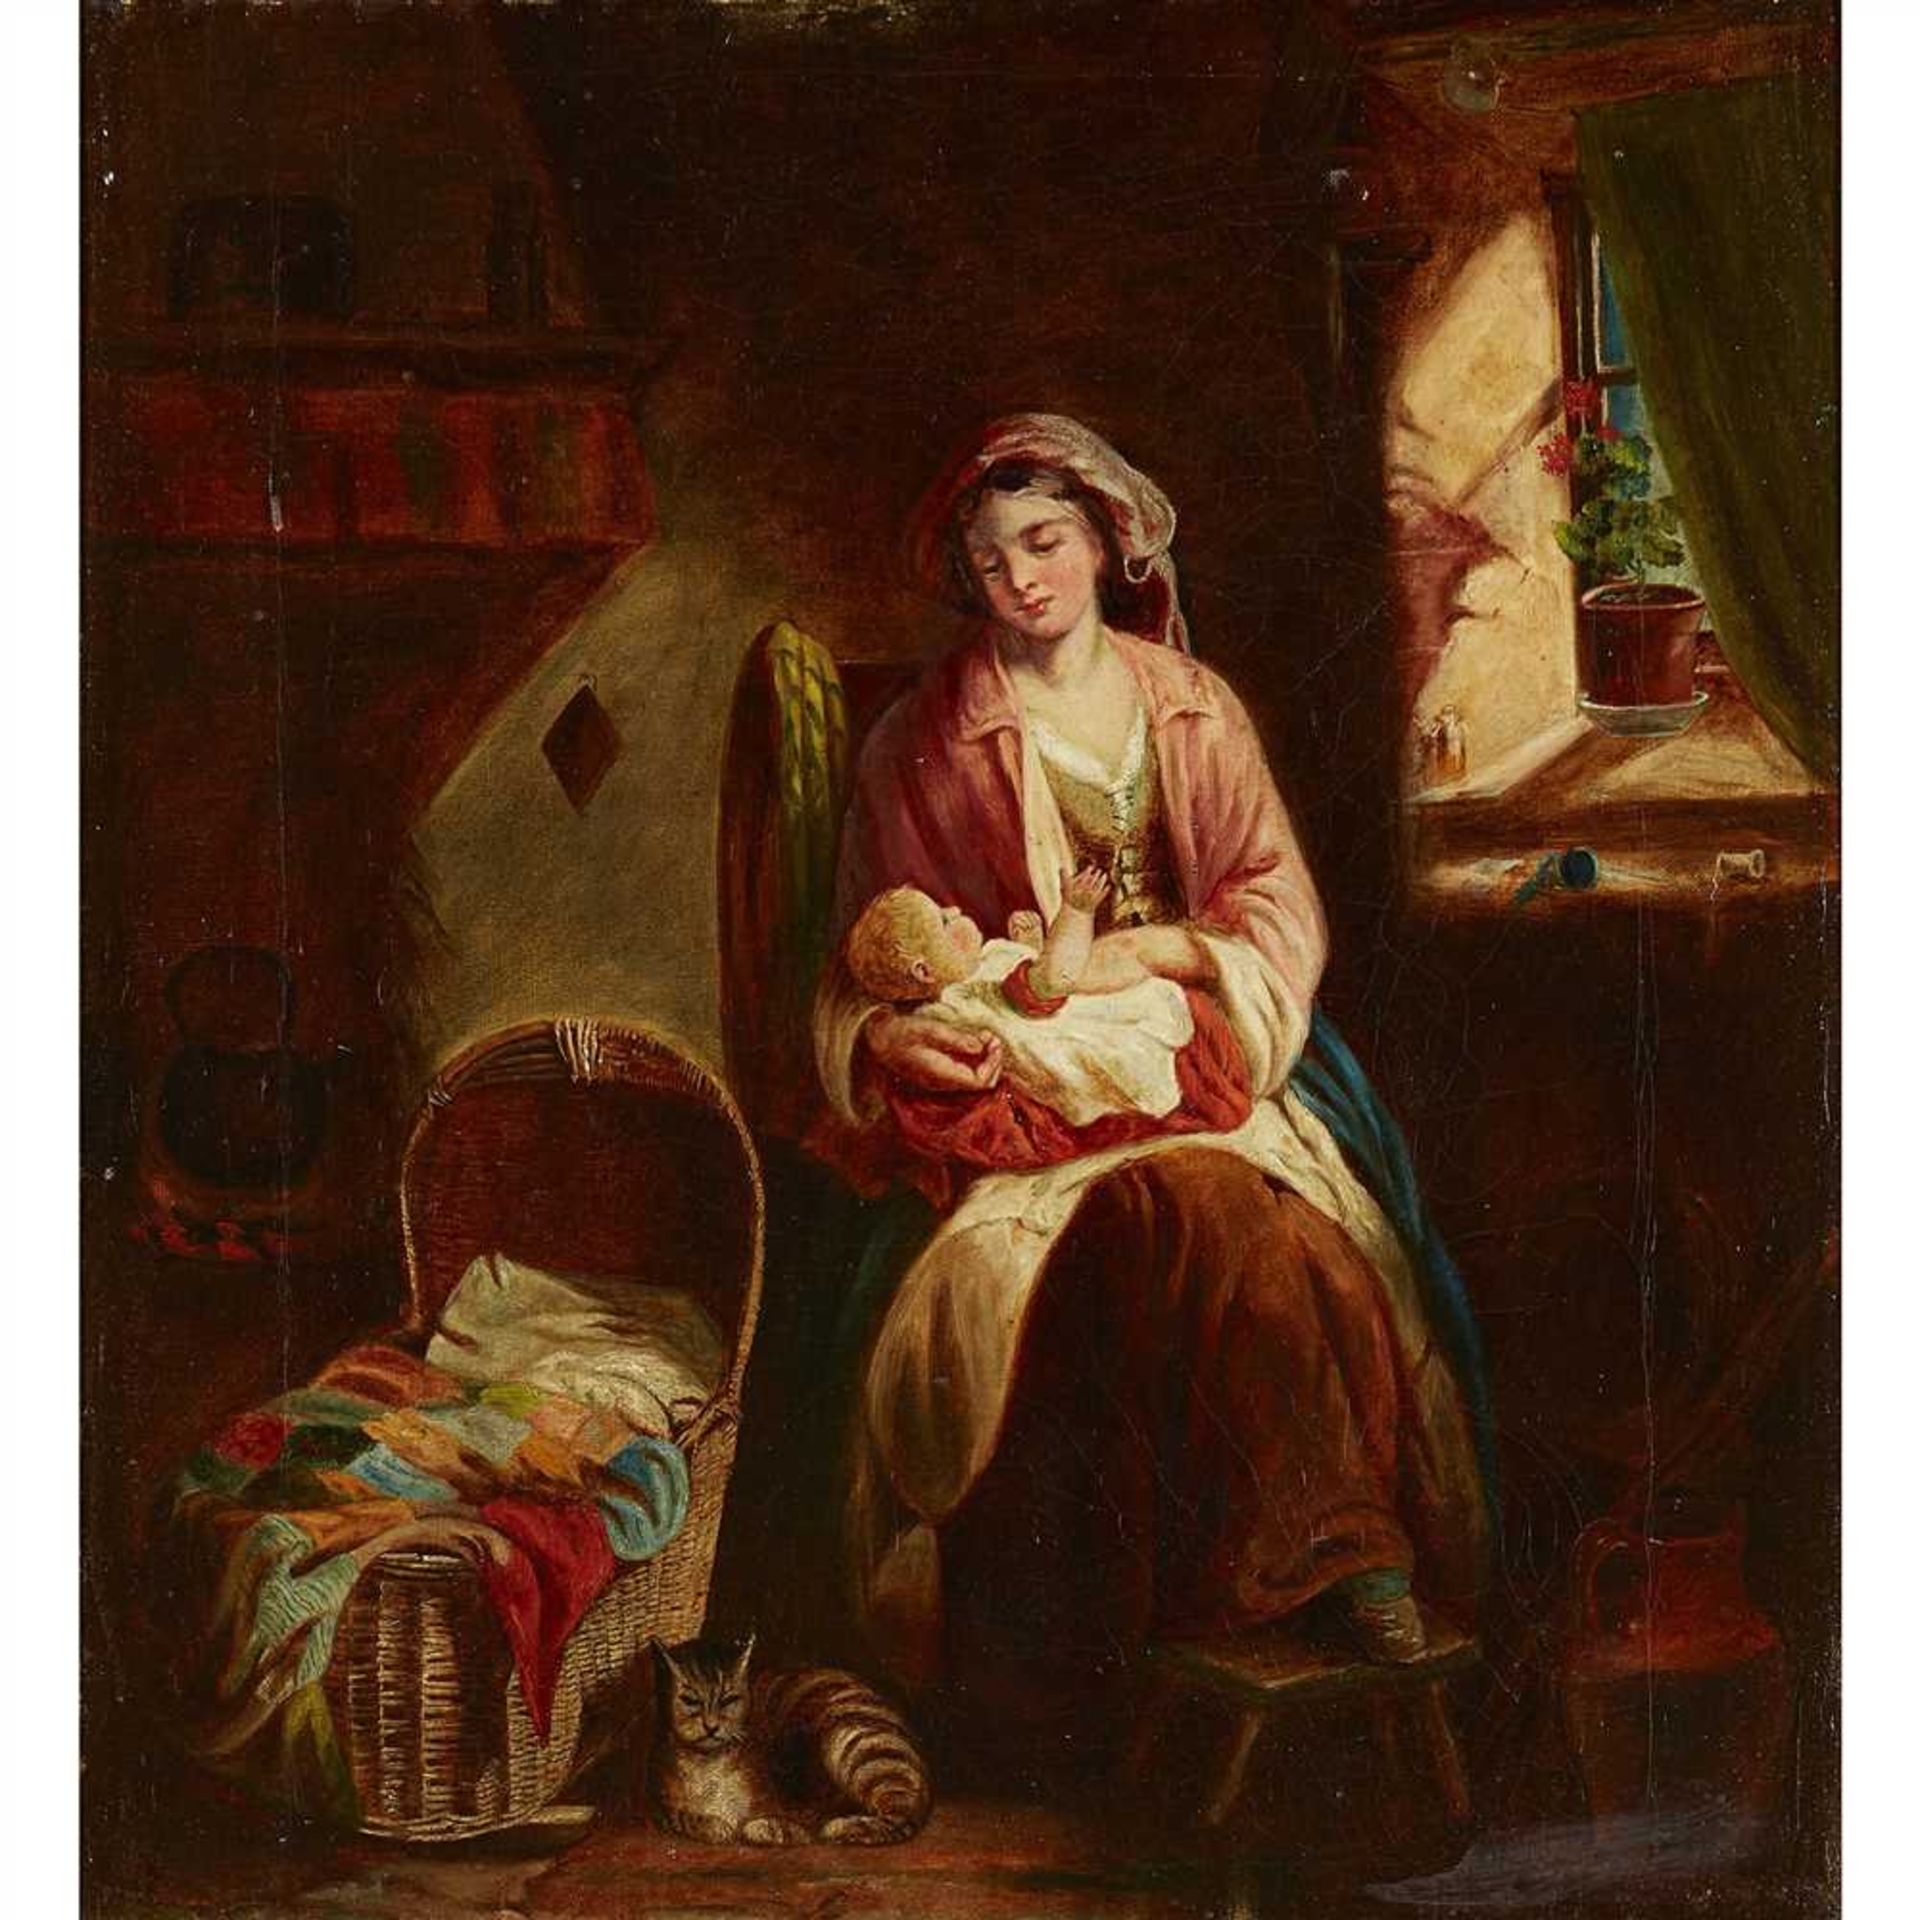 H.N. LAW (19TH CENTURY BRITISH) THE BASSINET Signed, oil on canvas (Dimensions: 45.5cm x 42cm (